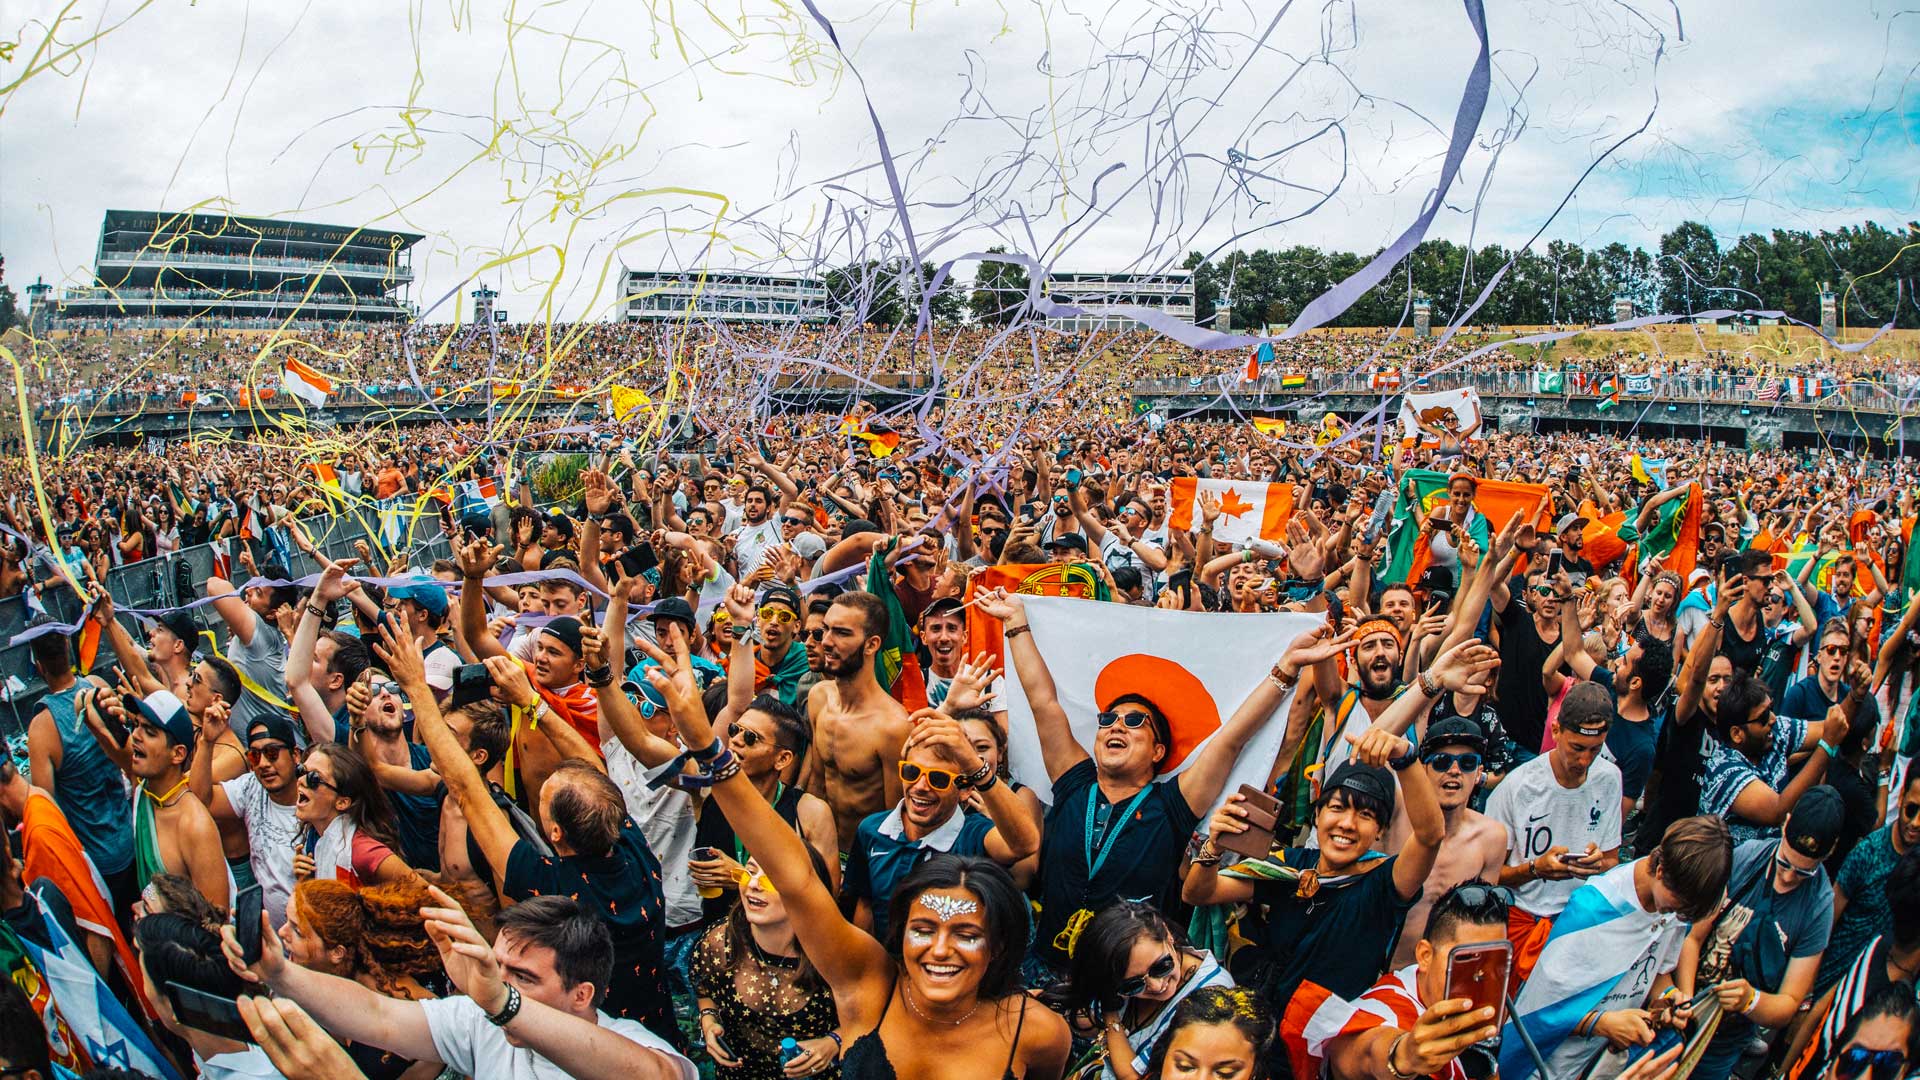 Tomorrowland 2021 could be postponed for few weeks